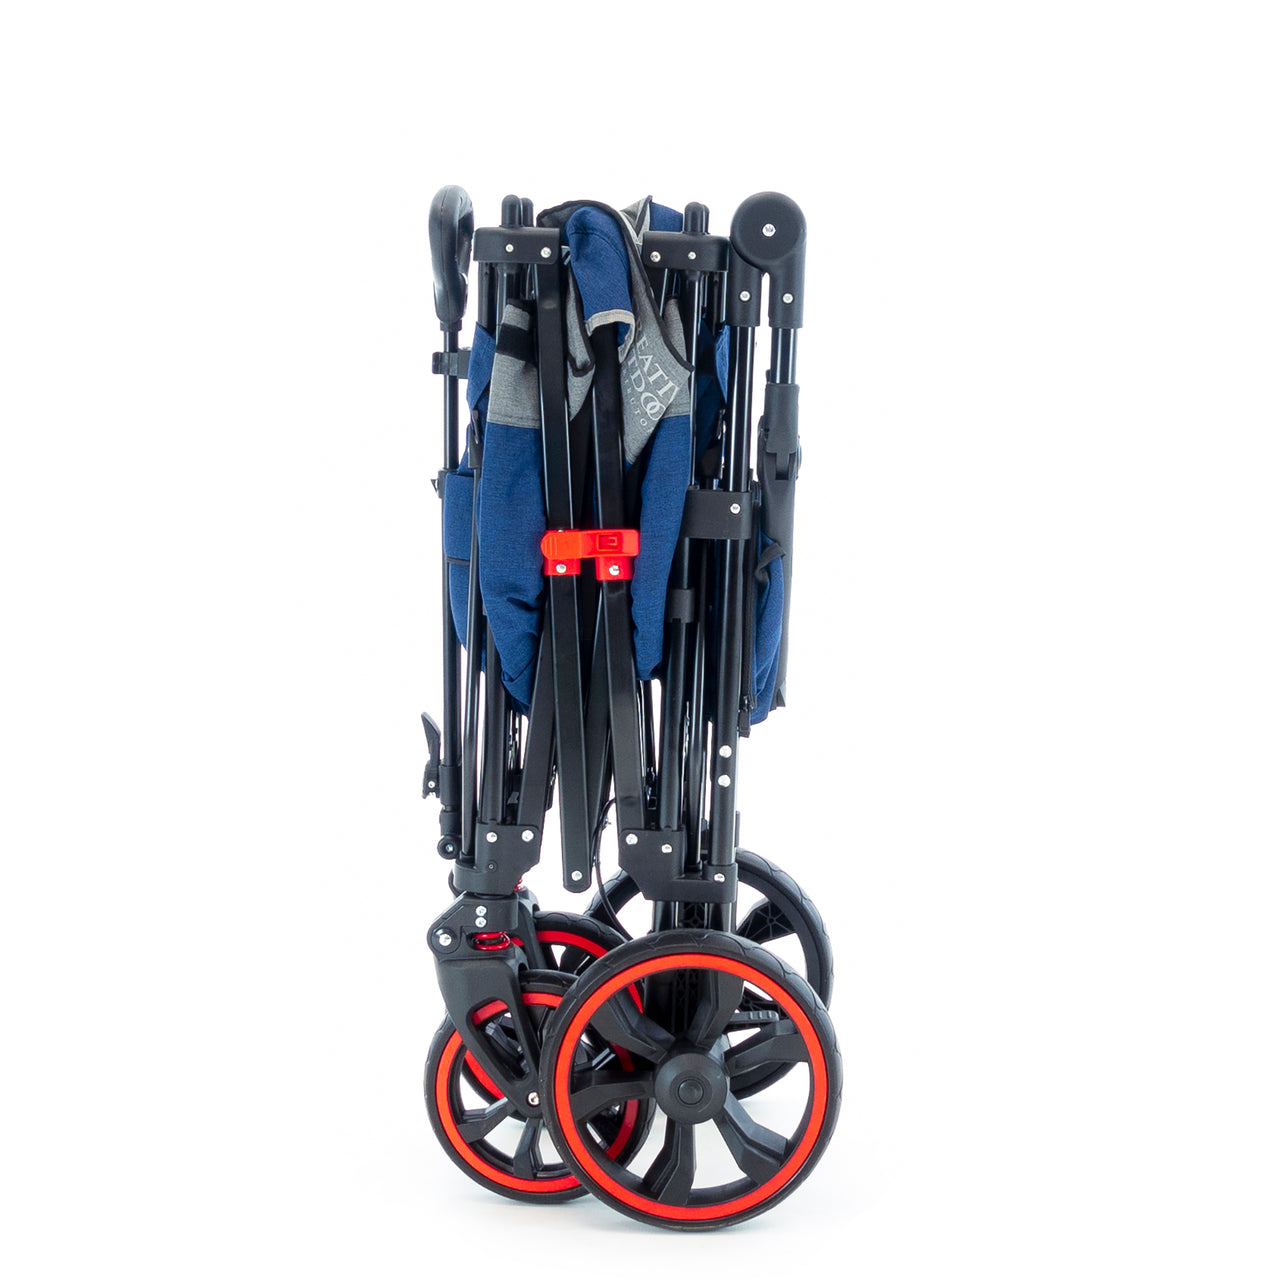 push-pull-folding-stroller-wagon-with-canopy-navy-blue